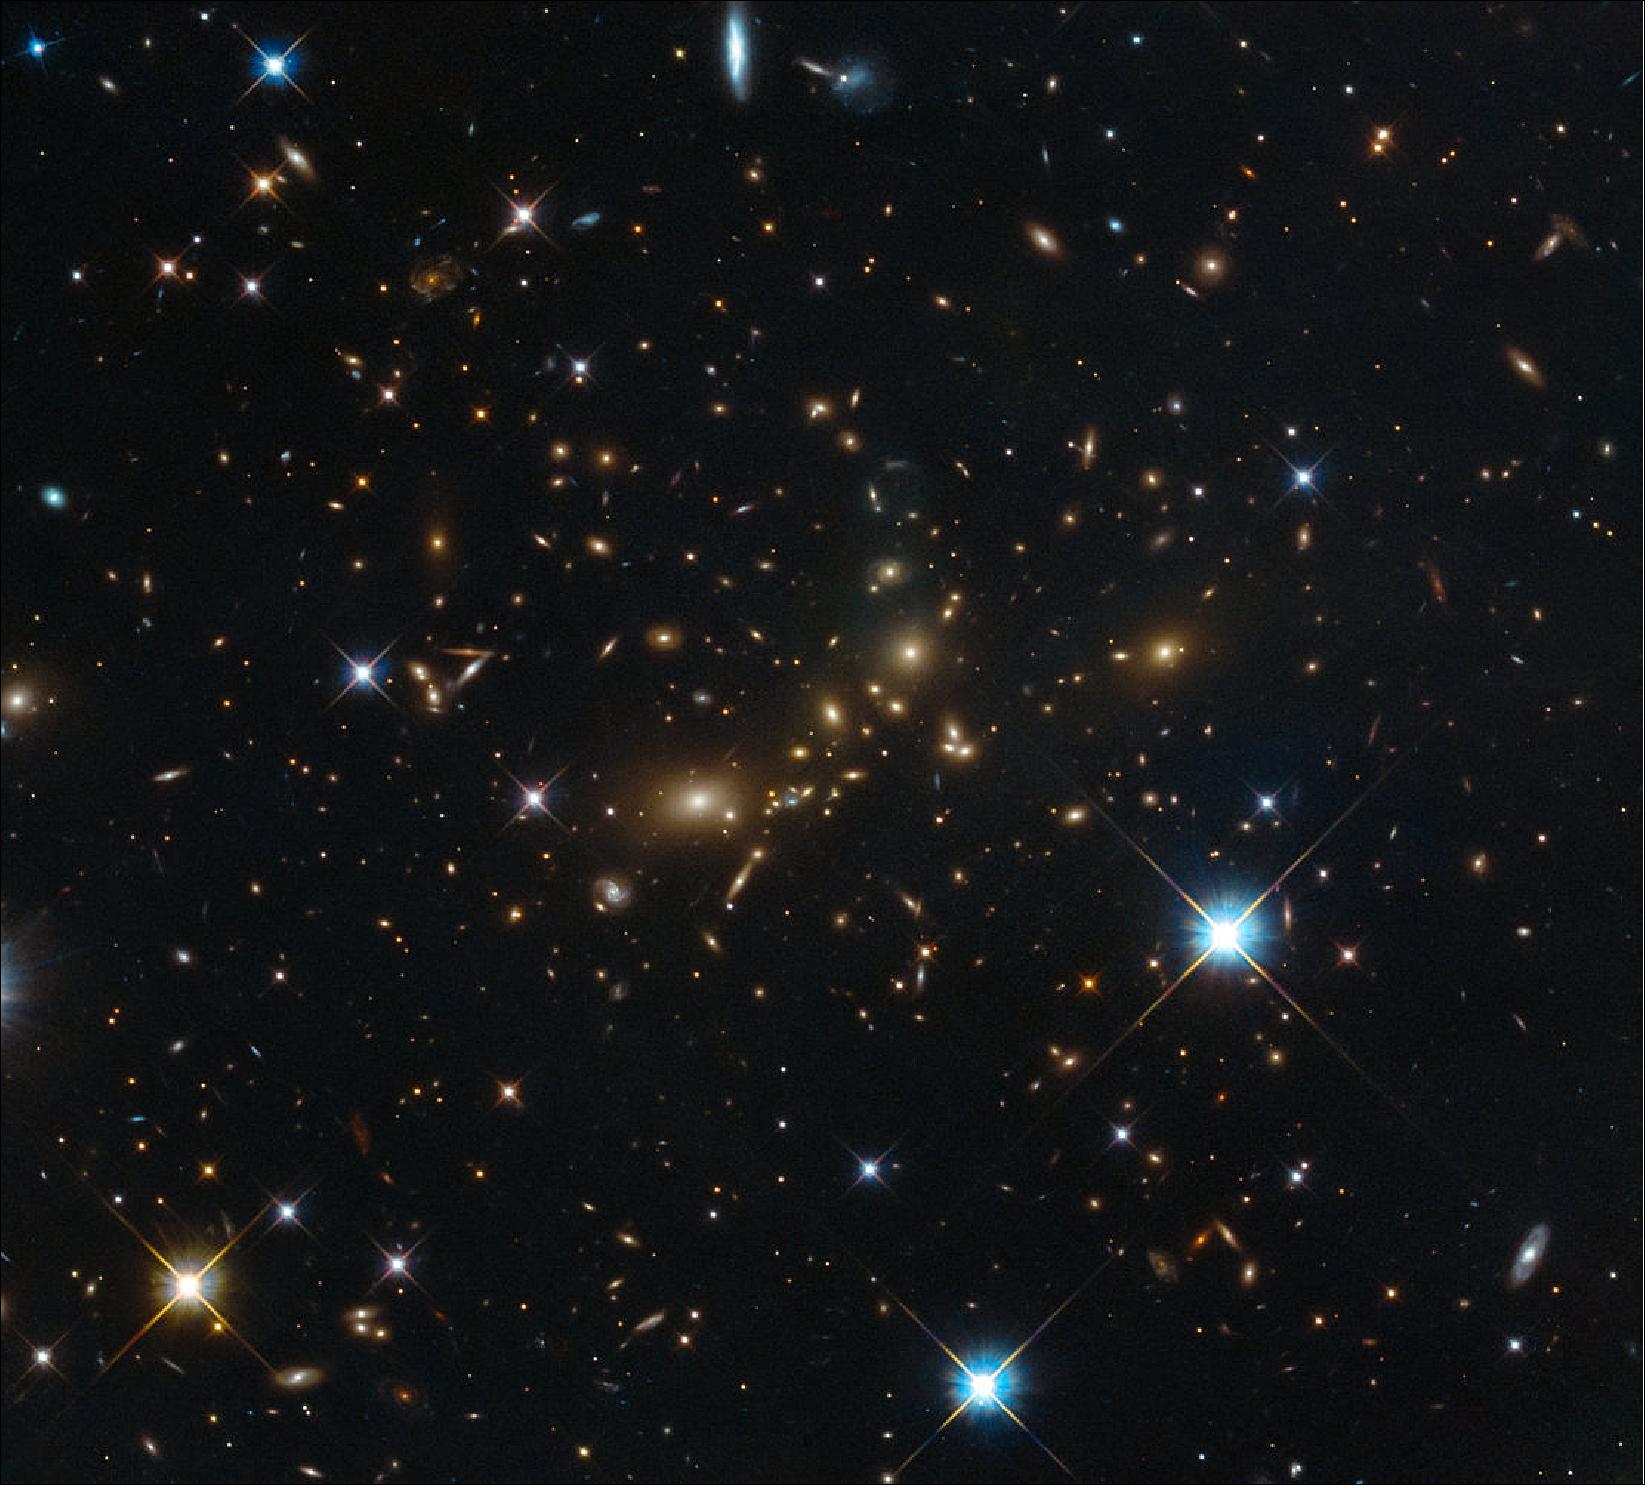 Figure 41: This image was taken by Hubble’s Advanced Camera for Surveys and Wide-Field Camera 3 as part of an observing program called RELICS (Reionization Lensing Cluster Survey). RELICS imaged 41 massive galaxy clusters with the aim of finding the brightest distant galaxies for the forthcoming NASA/ESA/CSA James Webb Space Telescope(JWST) to study (image credit: ESA/Hubble & NASA, RELICS)